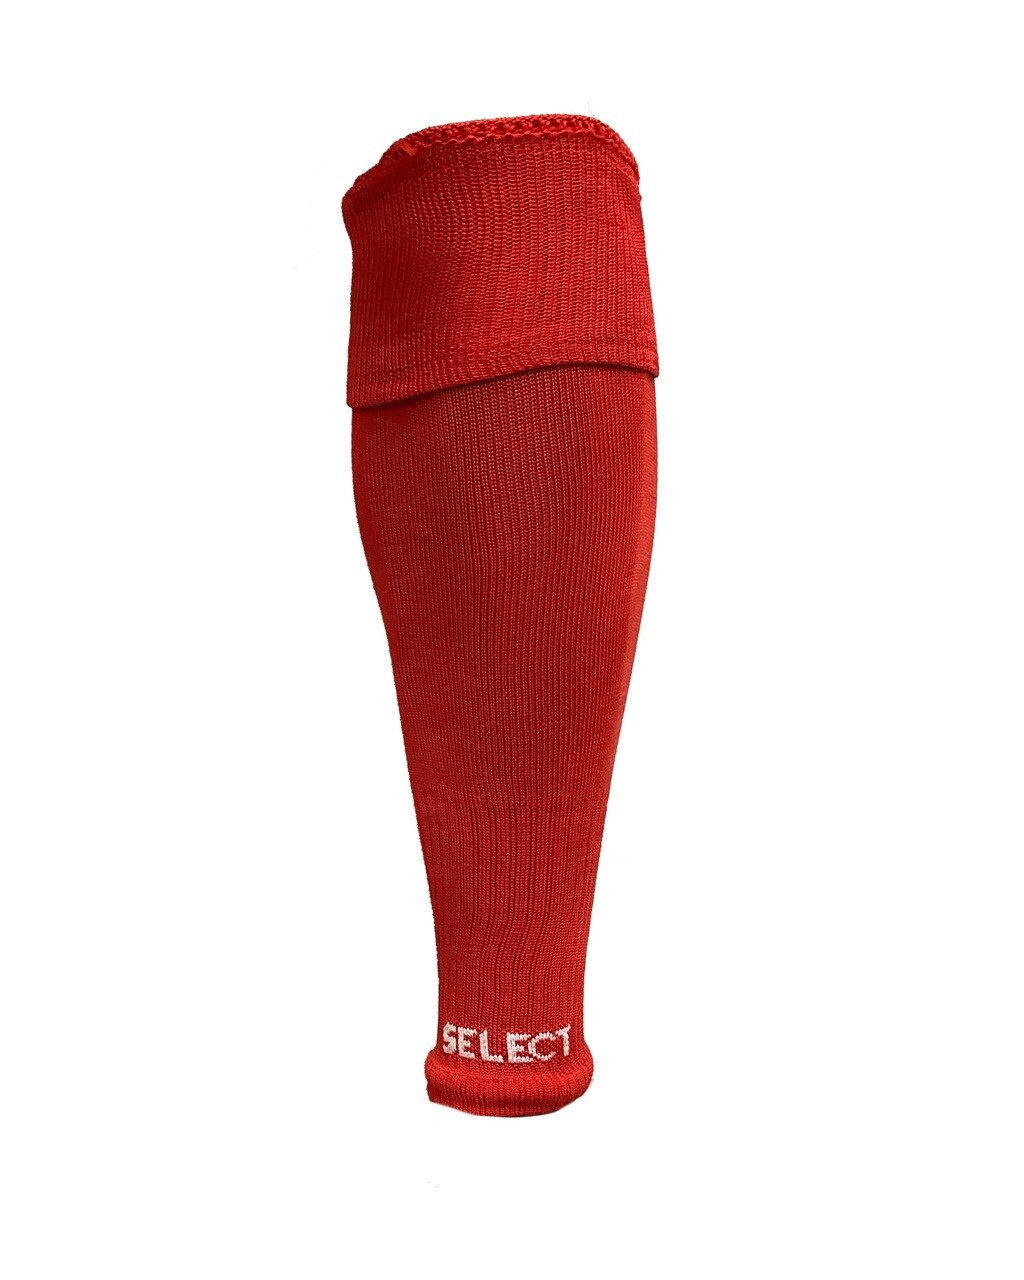 FOOTLESS SOCKS - RED - Select Football (Evolution Sports Imports Pty Ltd)